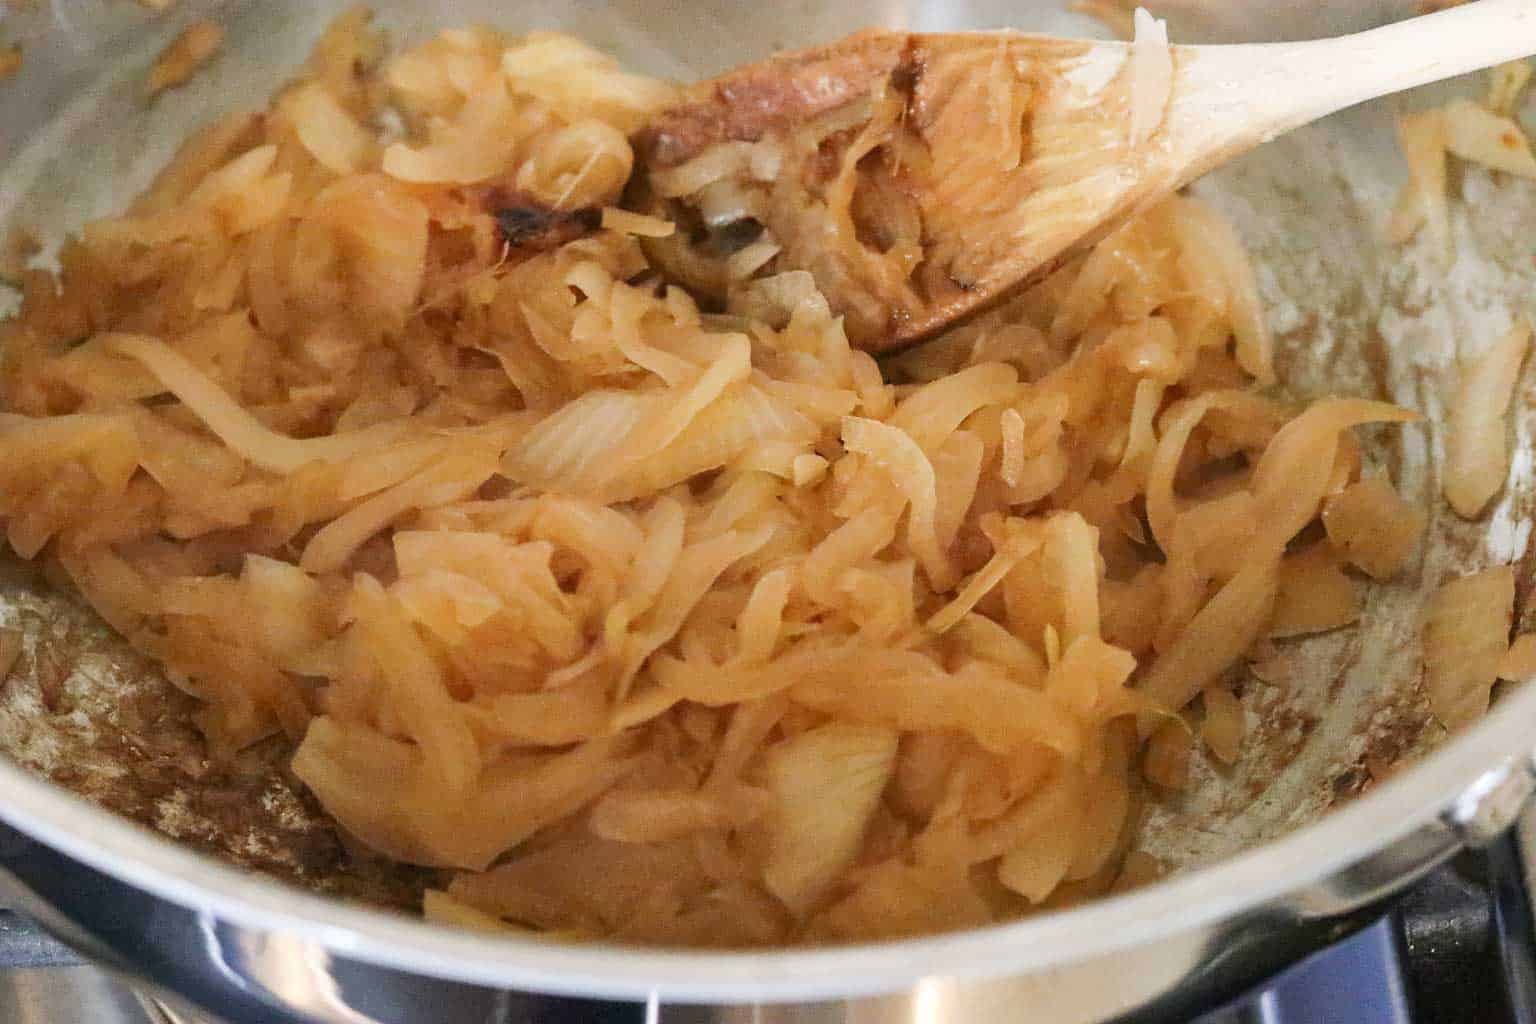 Caramelized onions in a metal pan with wooden spoon from Gourmet Done Skinny